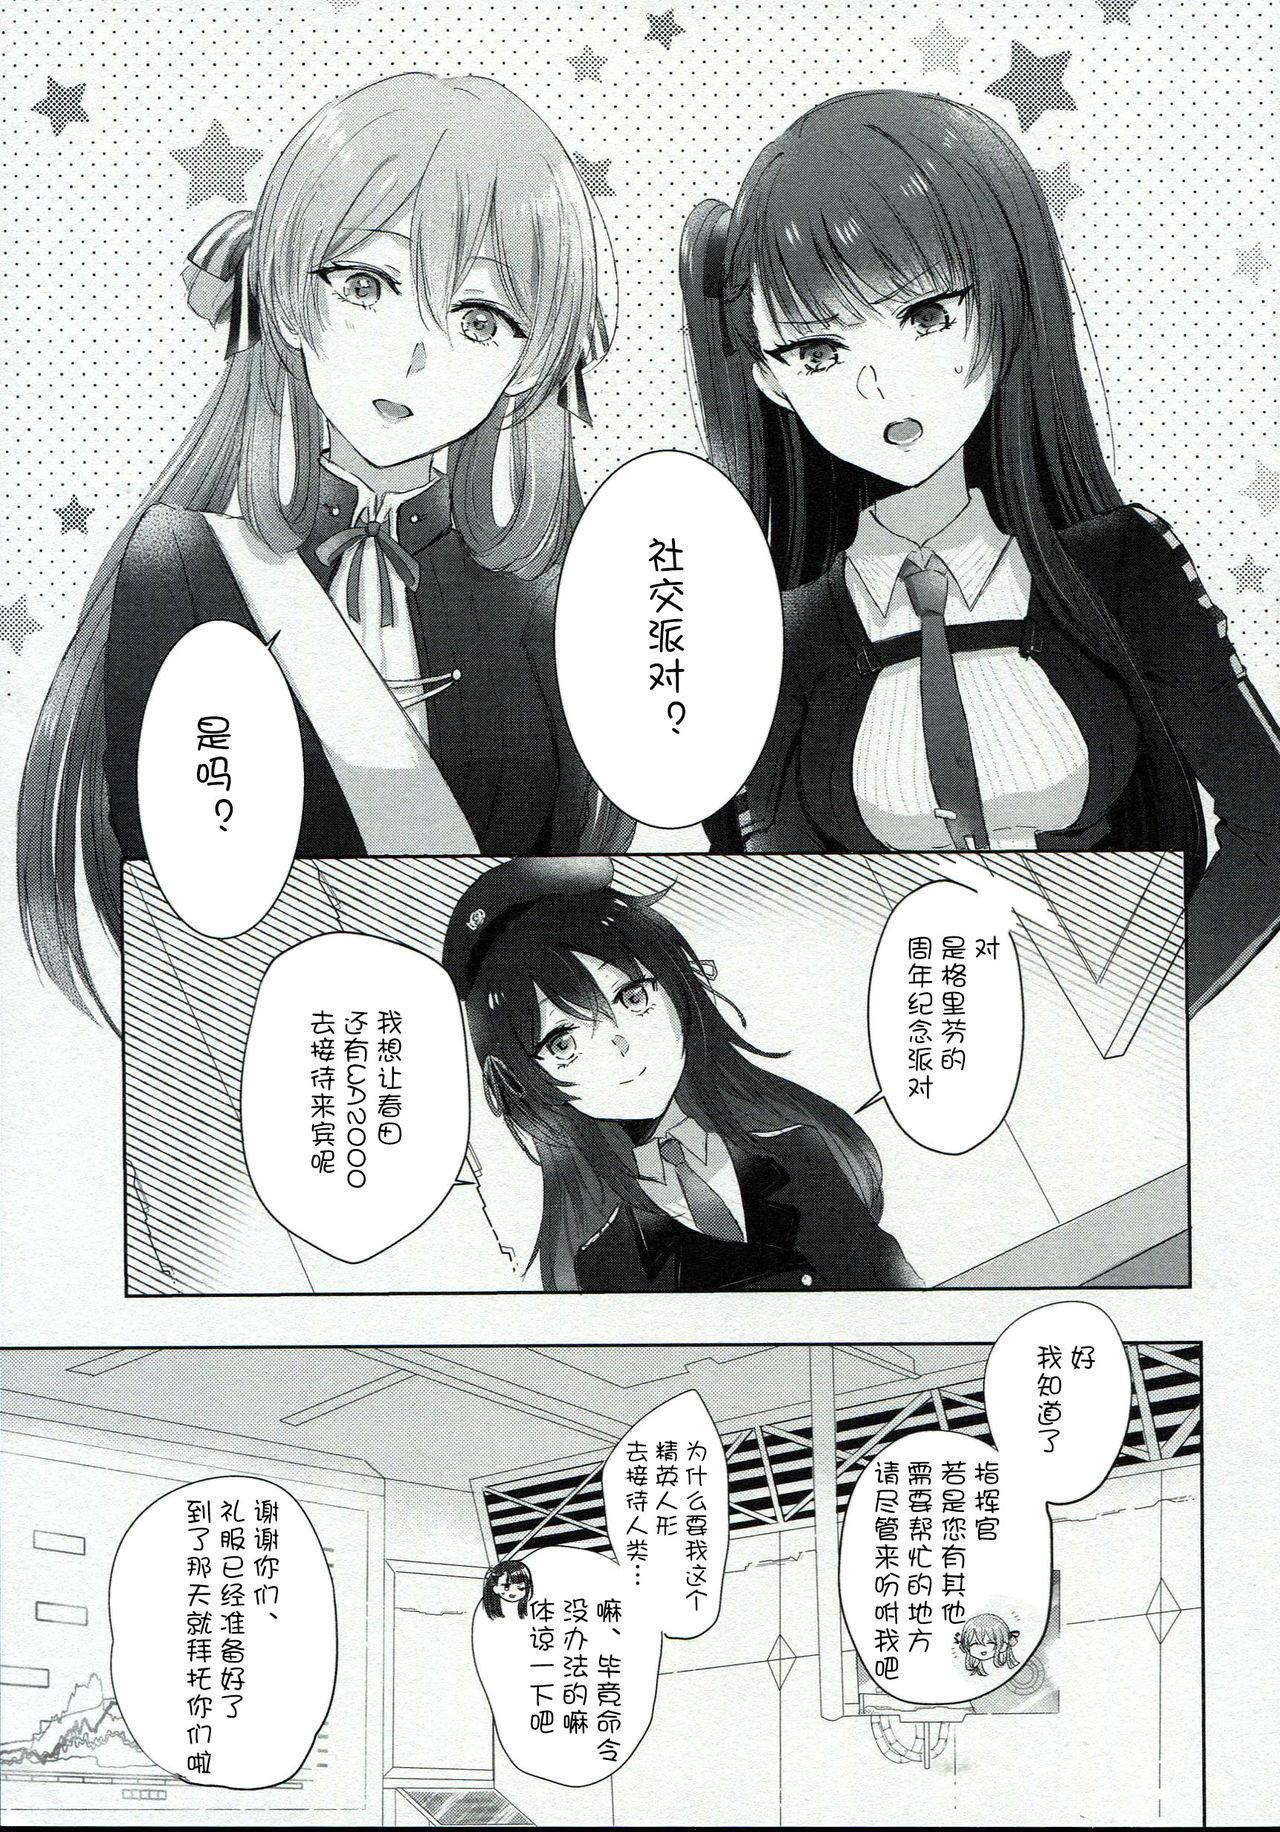 Young Tits Alcohol wa Amai - Girls frontline Virginity - Page 3